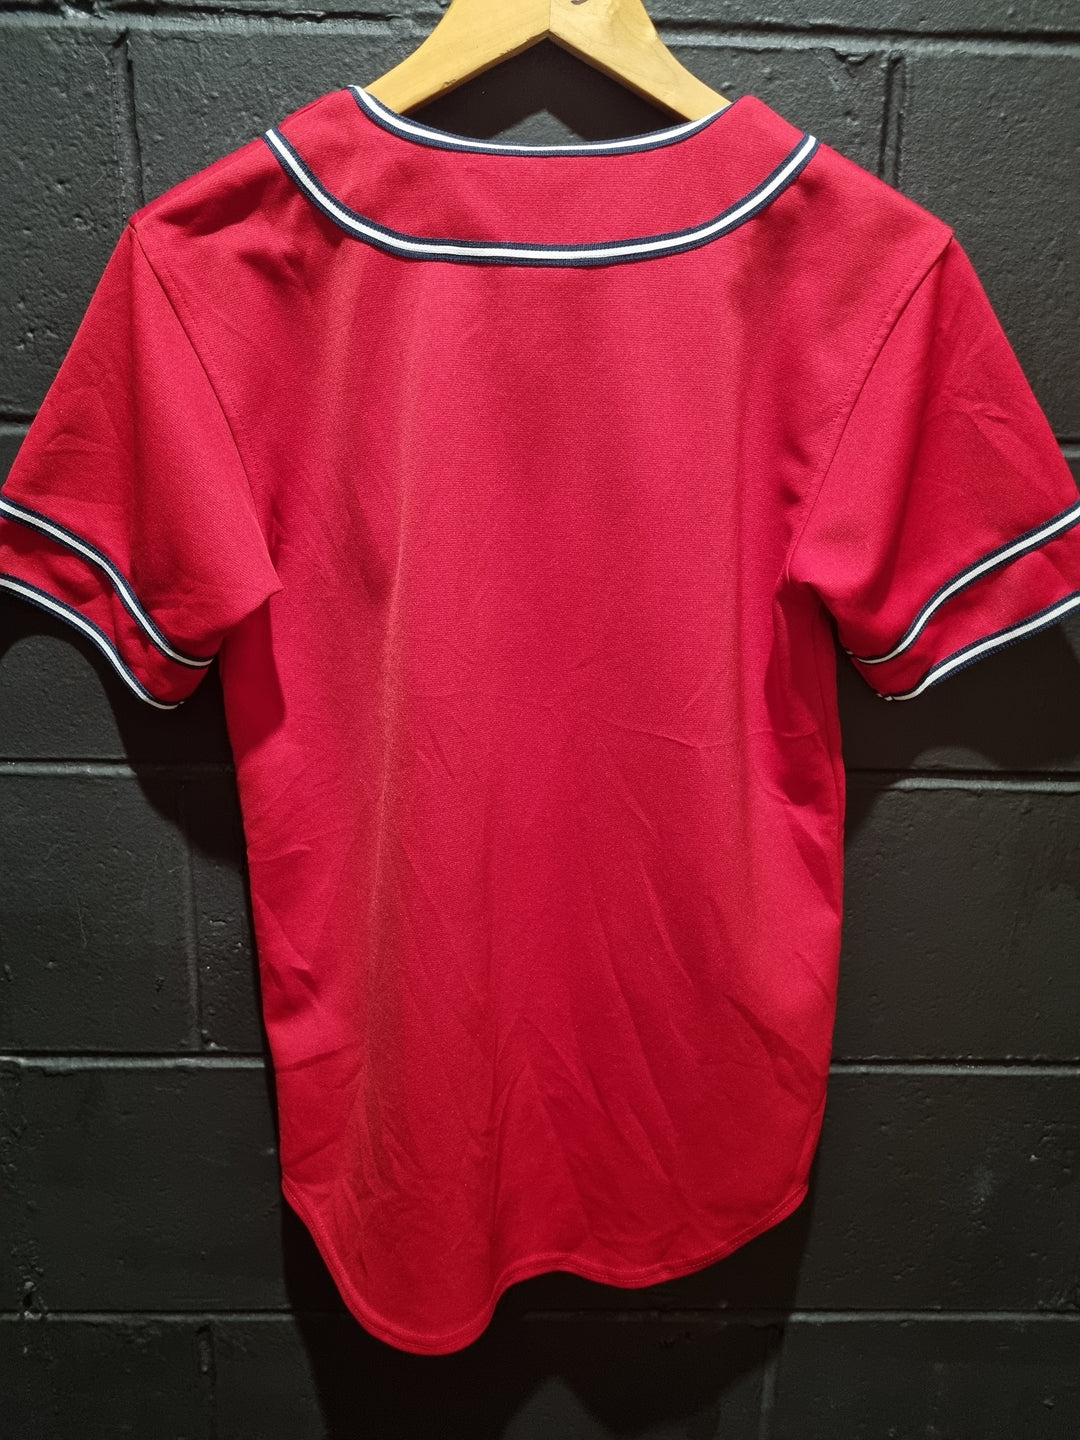 St Louis Cardinals Replica Youth Large / Adult XS